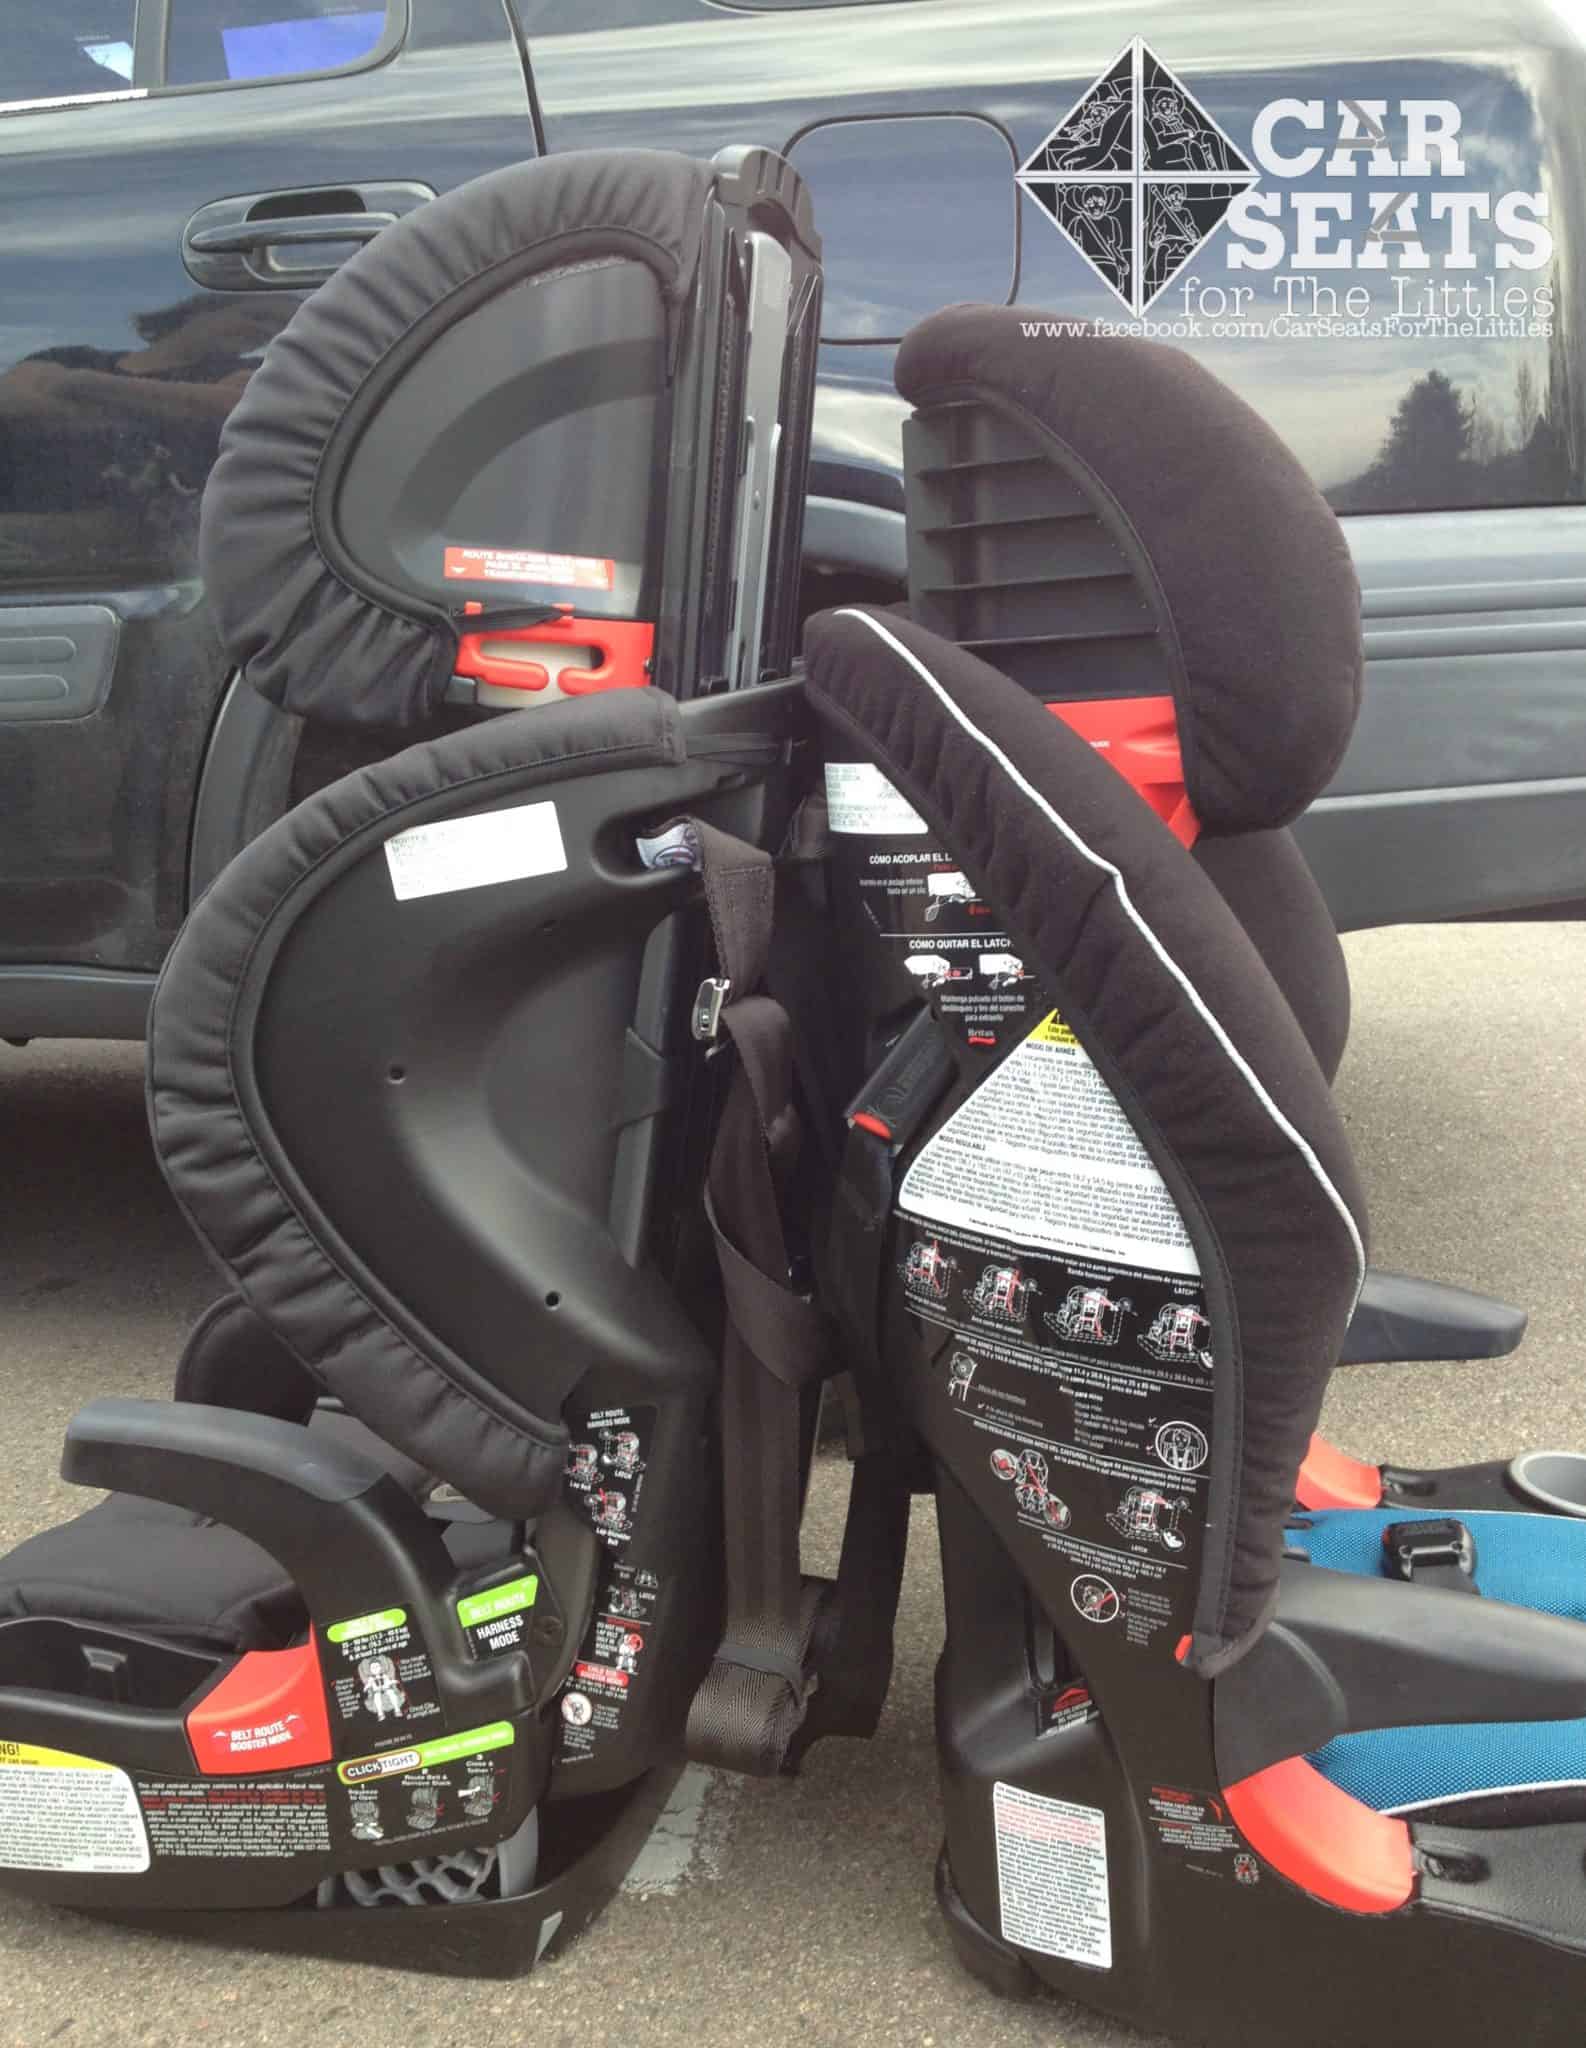 Britax Frontier 90, Frontier 85, booster, high back booster, no back booster, hbb, nbb, click tight, combination seat